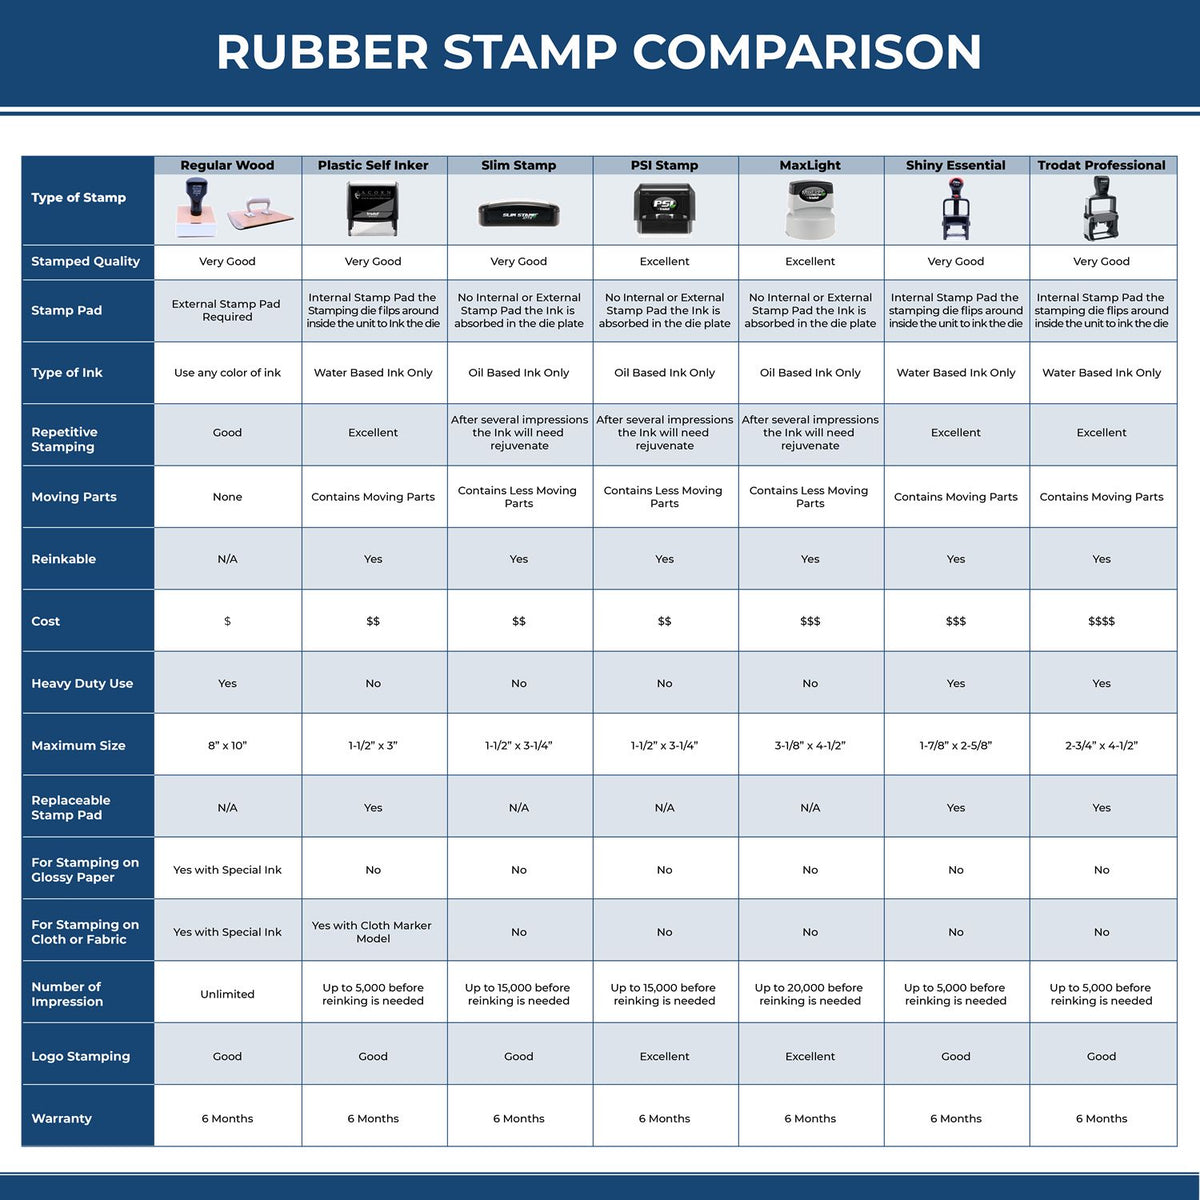 Large Self-Inking Revised with Box Stamp 5565S Rubber Stamp Comparison